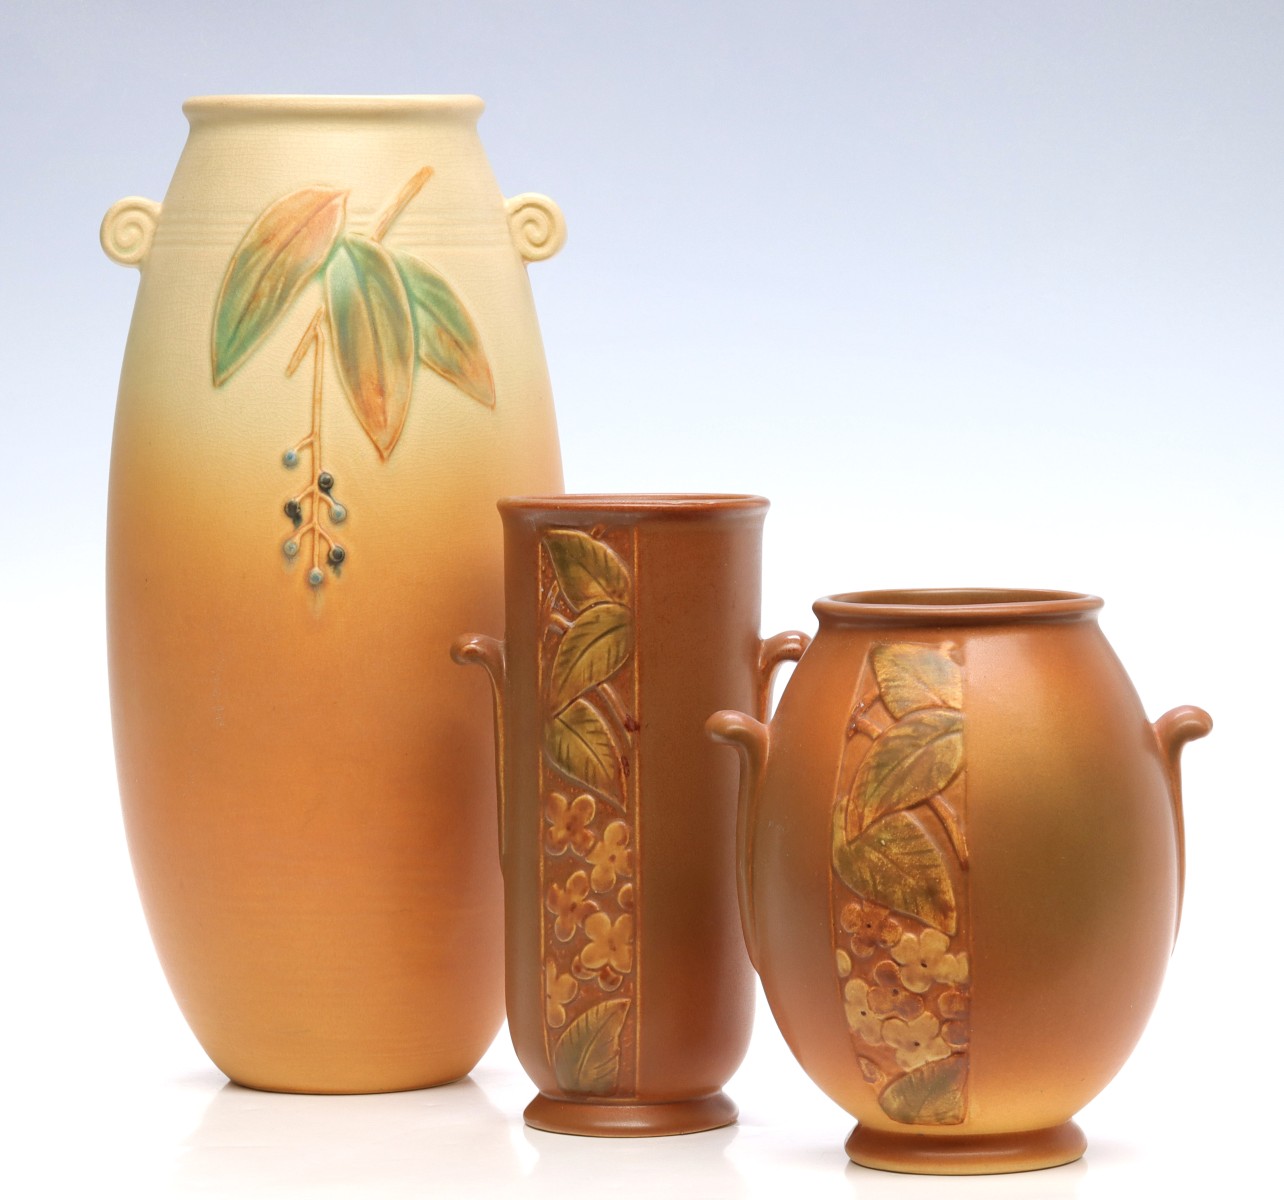 A GROUP OF WELLER ART POTTERY UP TO 11 INCHES